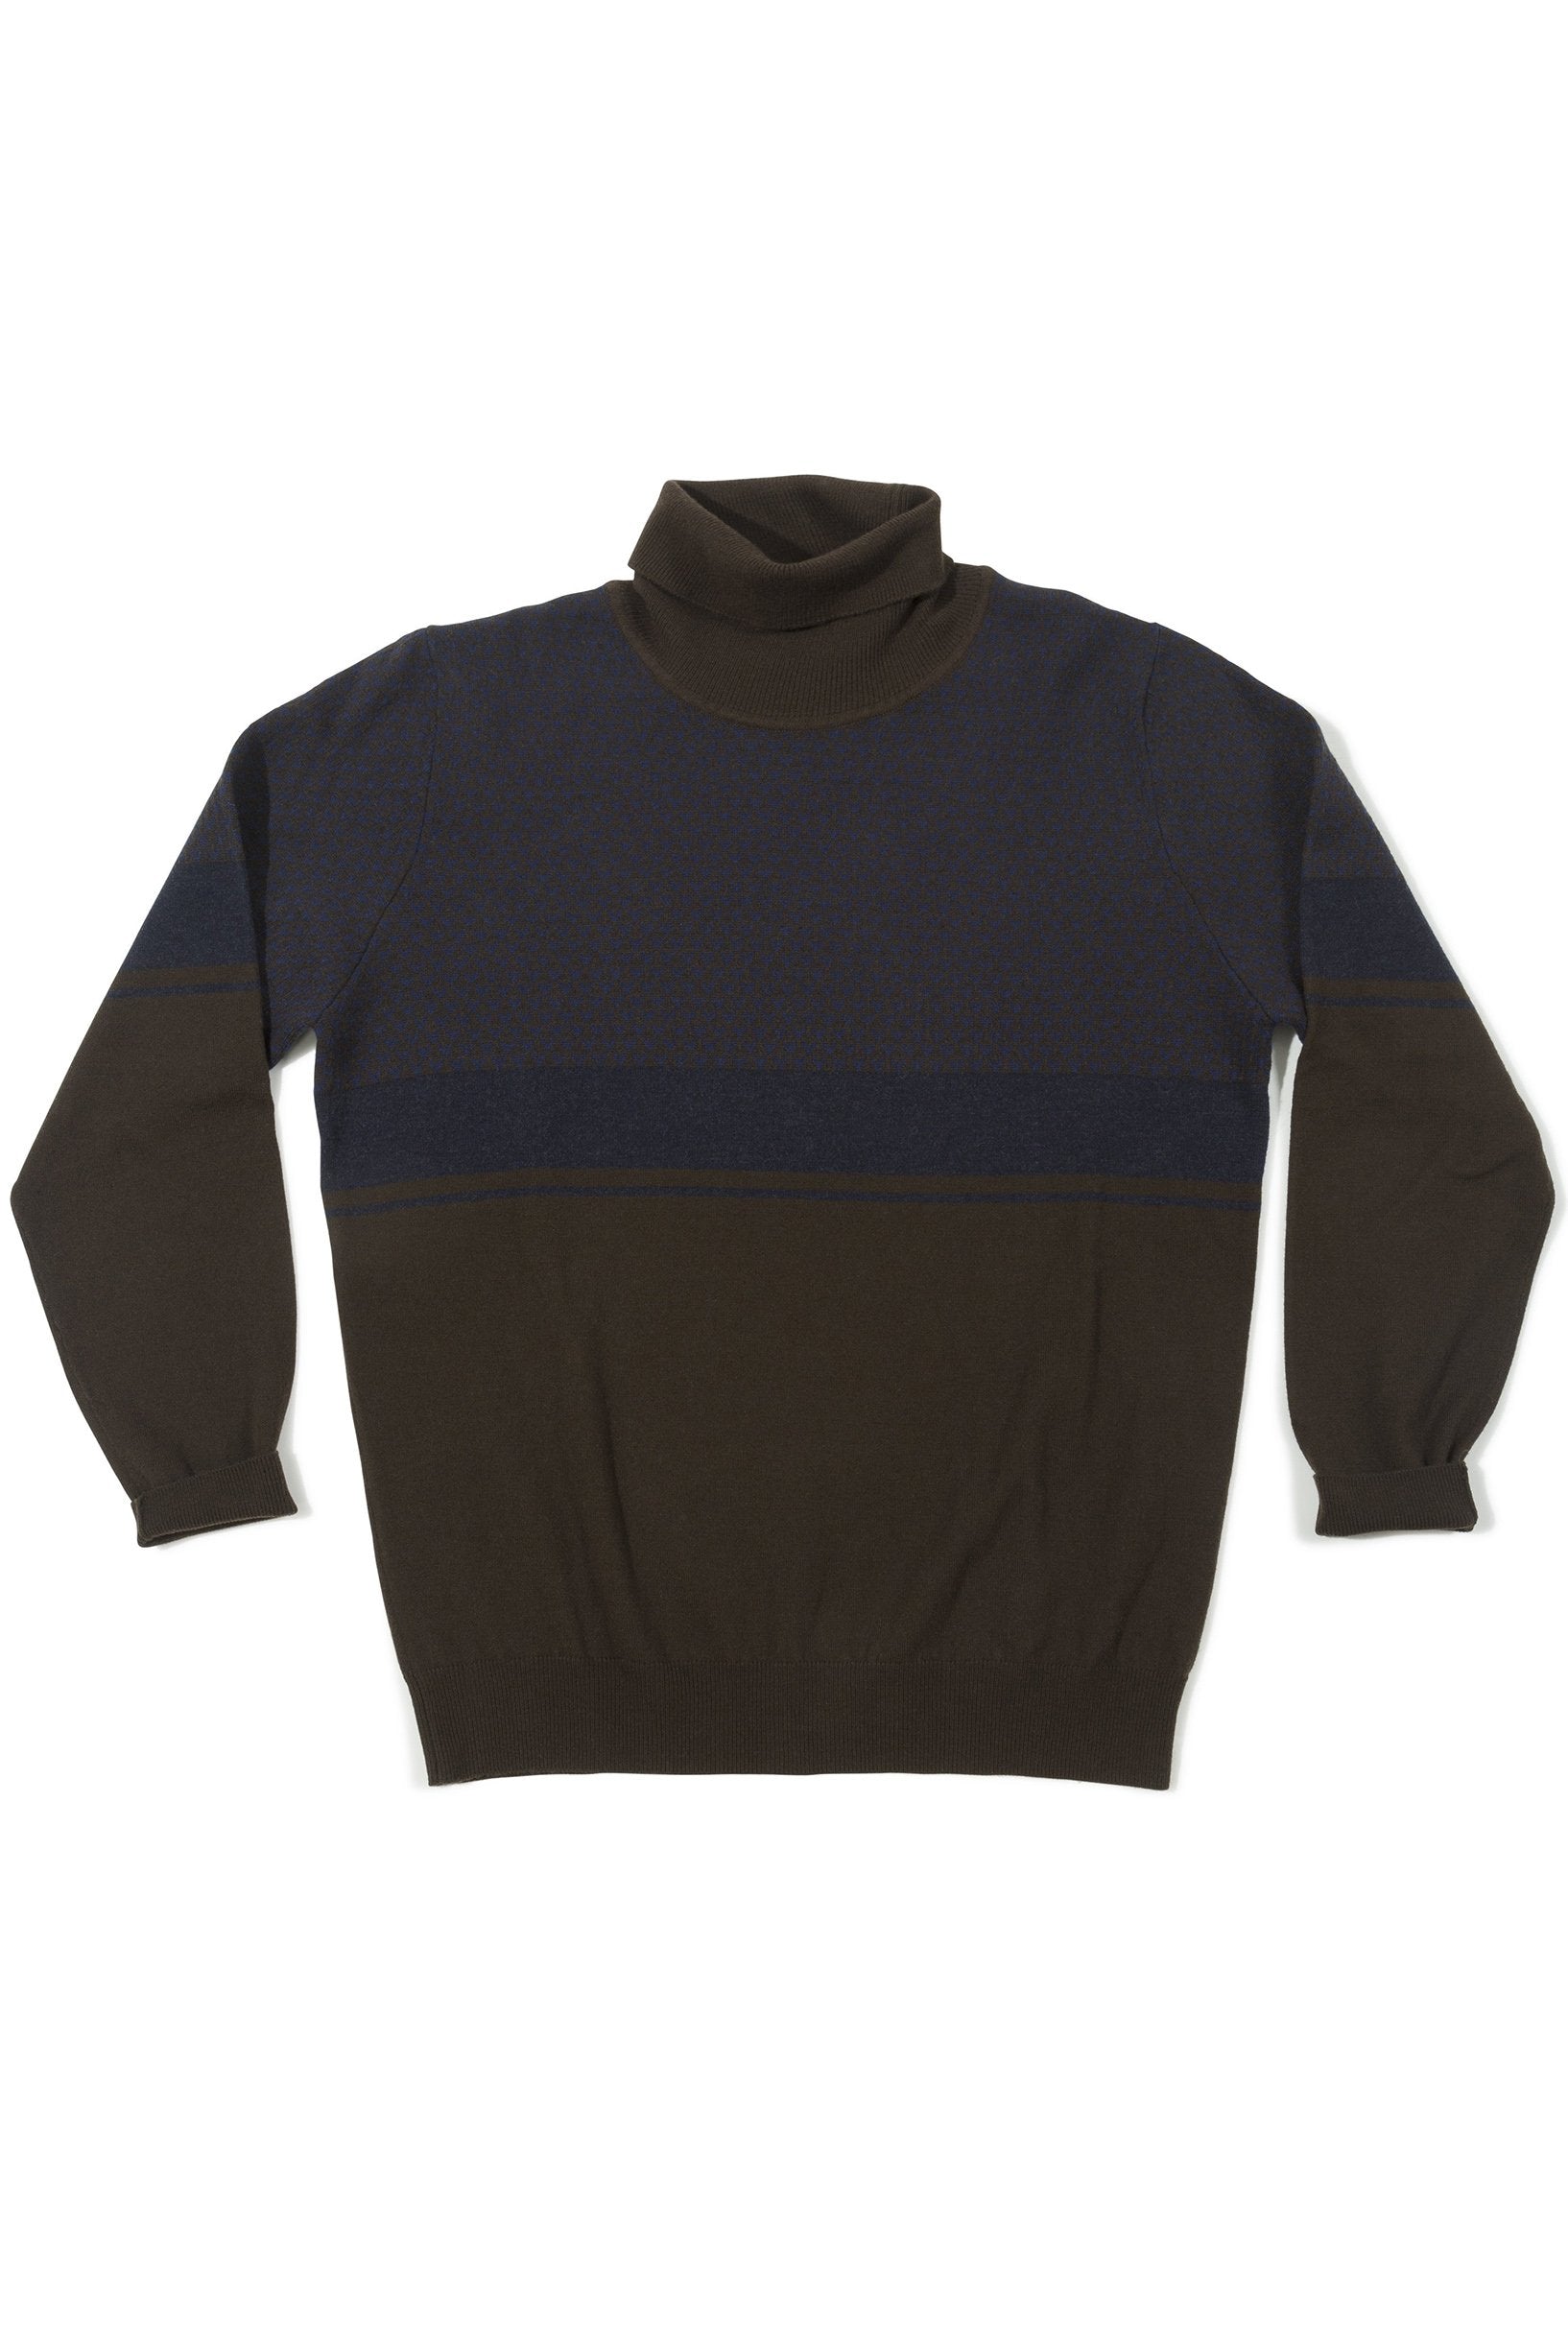 Caruso Brown with Blue Jacquard Rollneck Sweater